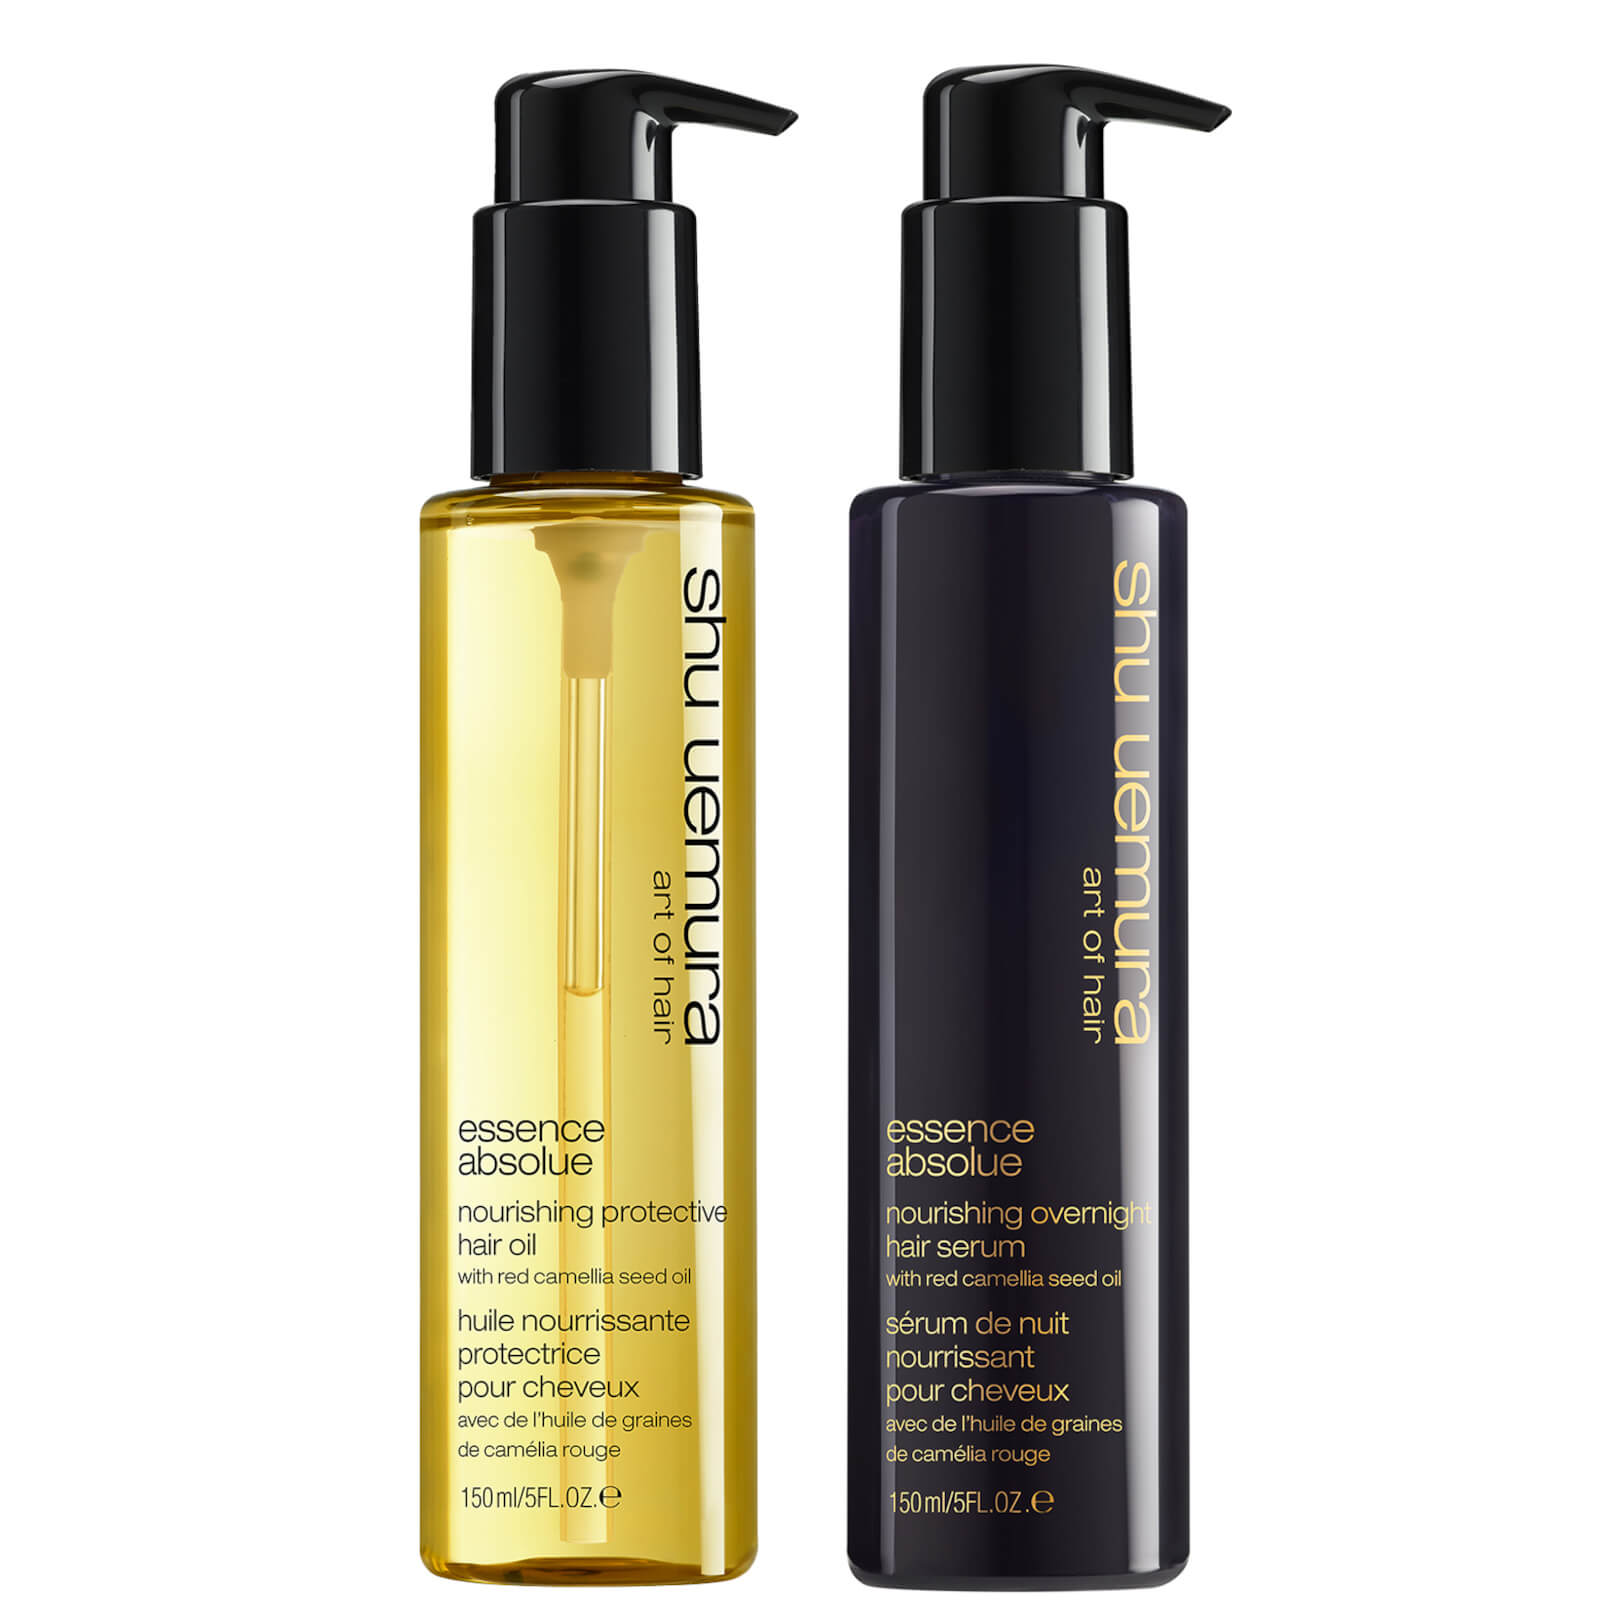 Image of Shu Uemura Art of Hair Essence Absolue Oil and Essence Absolue Overnight Serum Duo for Hair Protectection